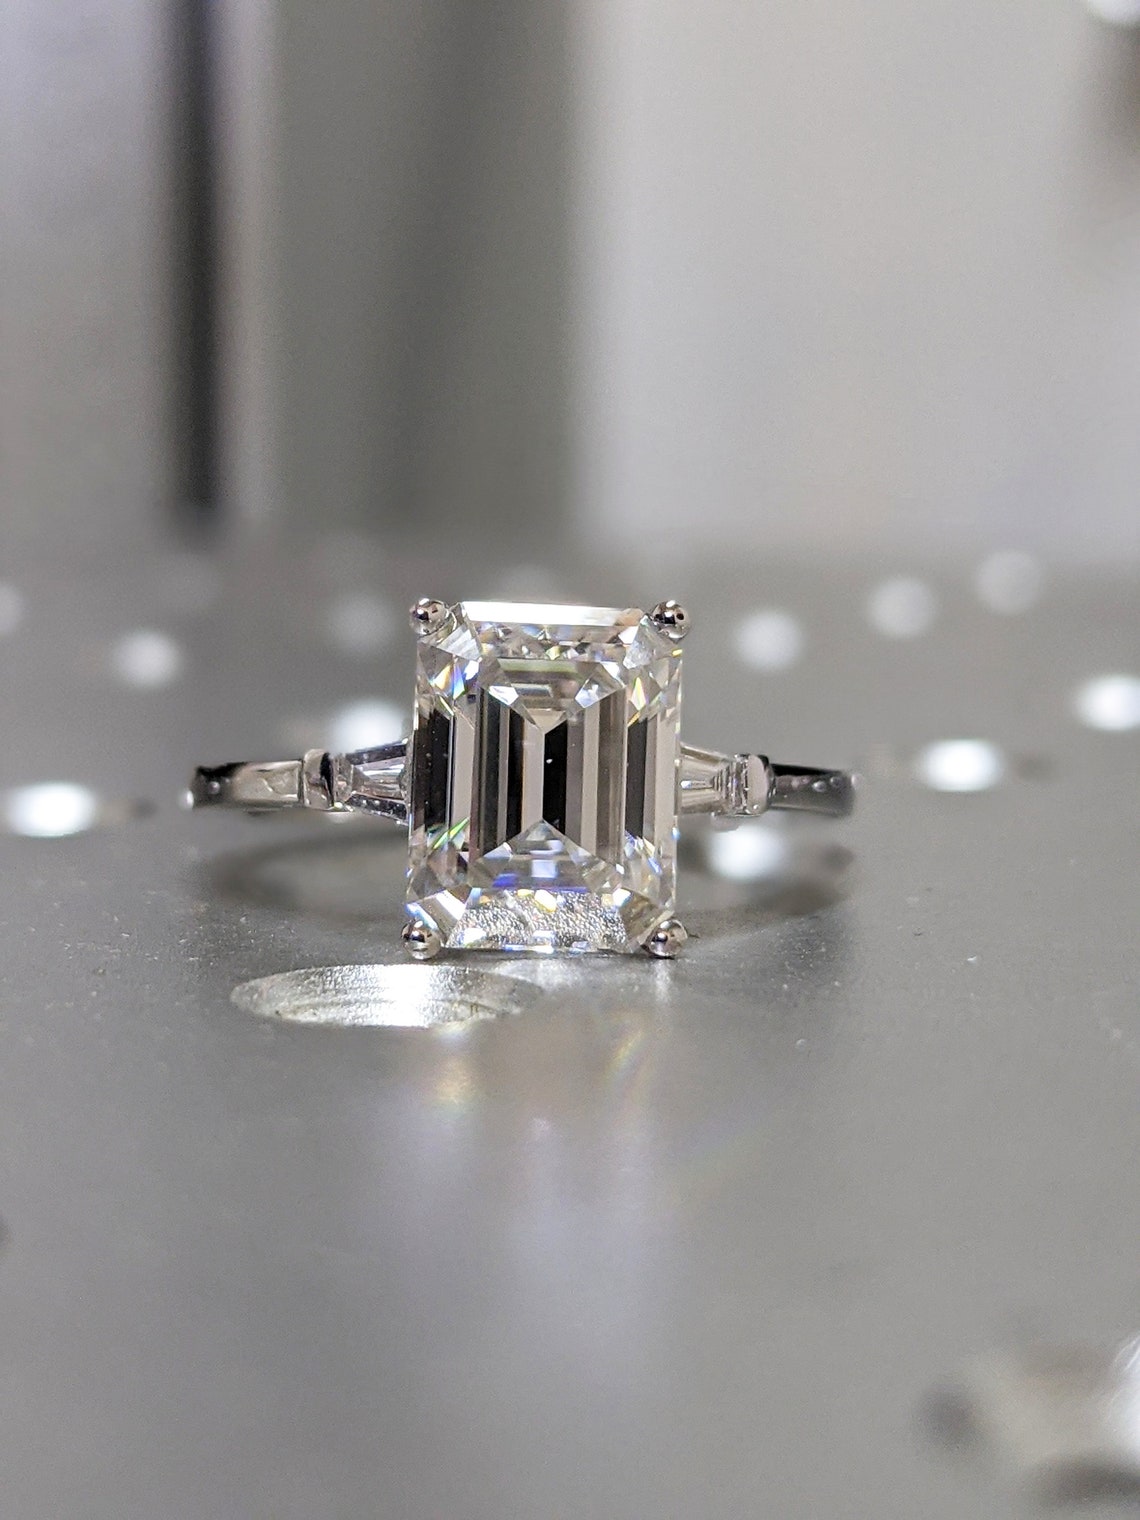 Emerald Cut Engagement Ring Emerald Cut Ring Tapered - Etsy